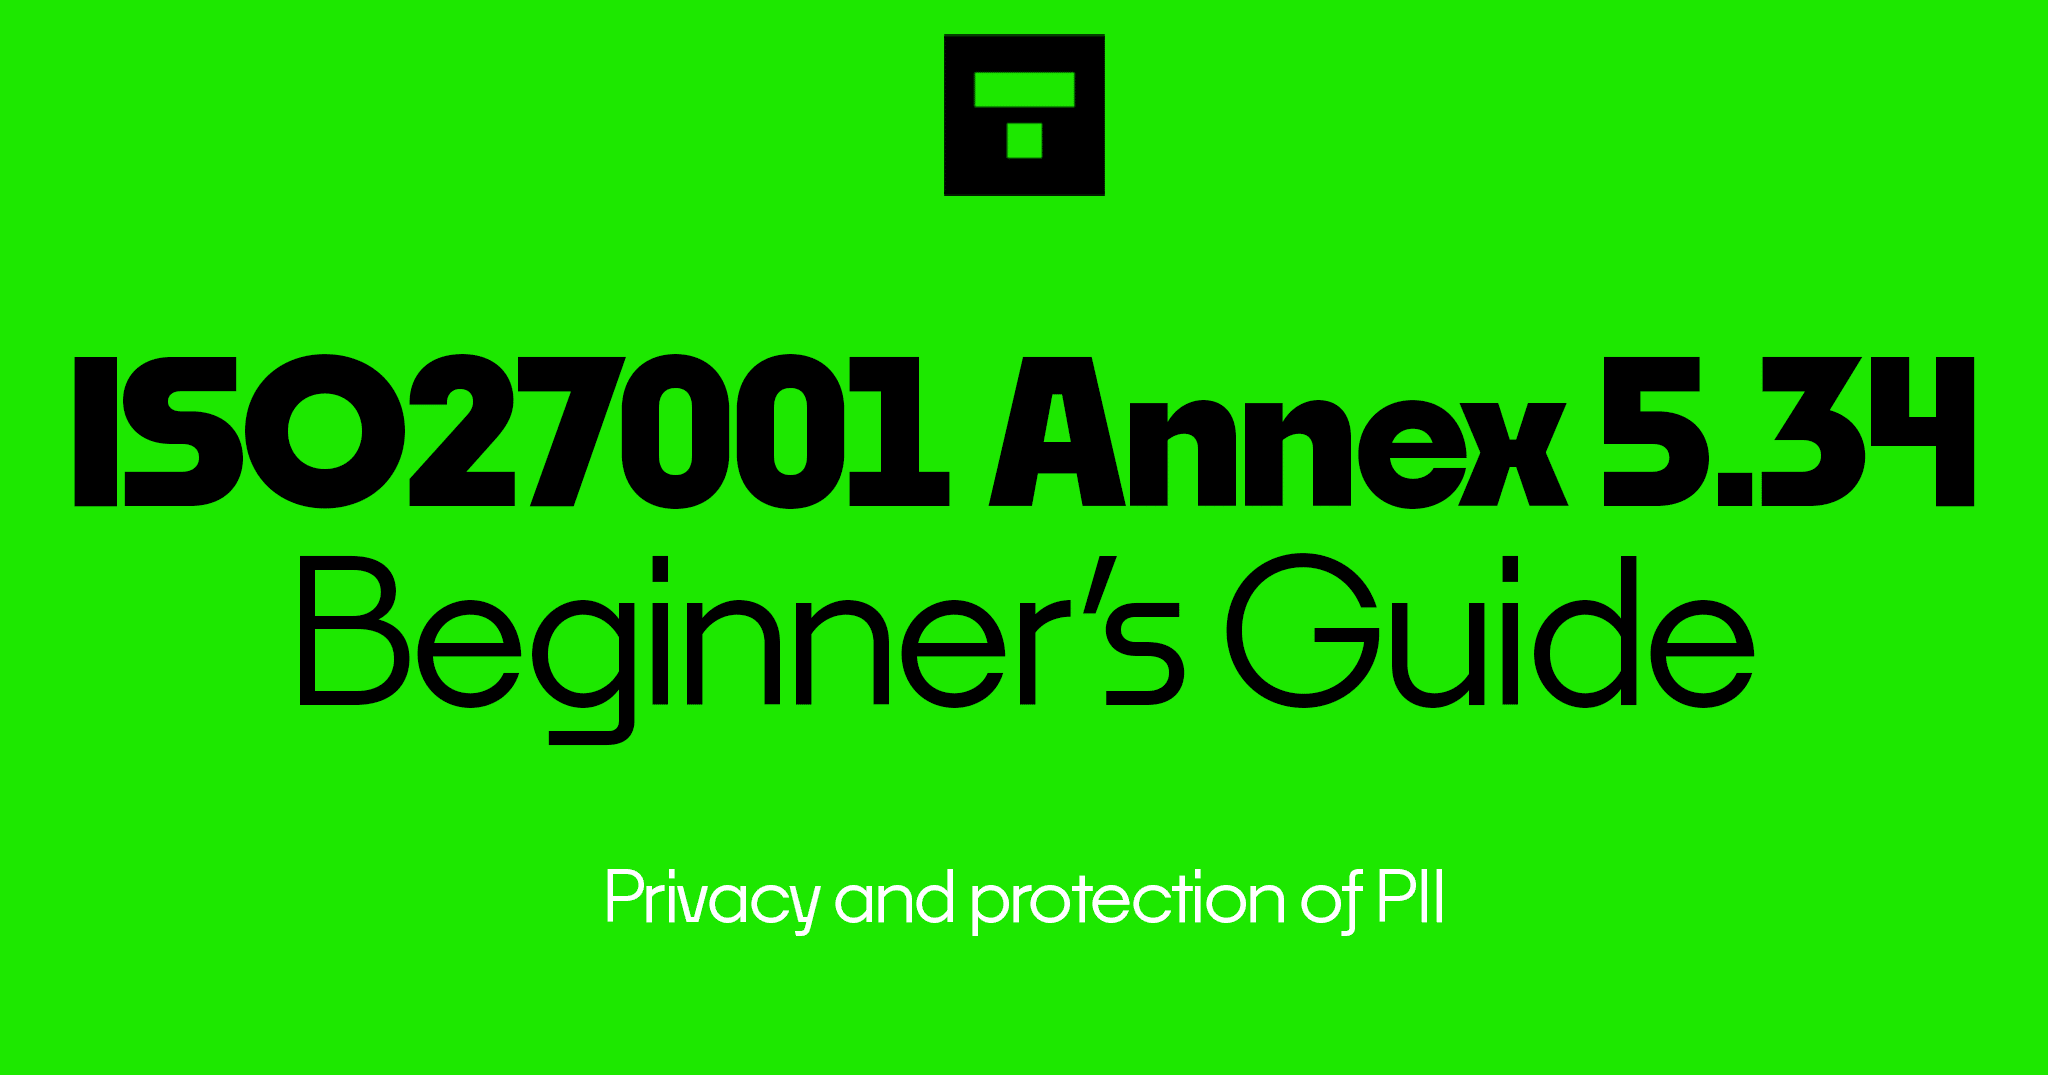 How To Implement ISO 27001 Annex A 5.34 Privacy And Protection Of PII